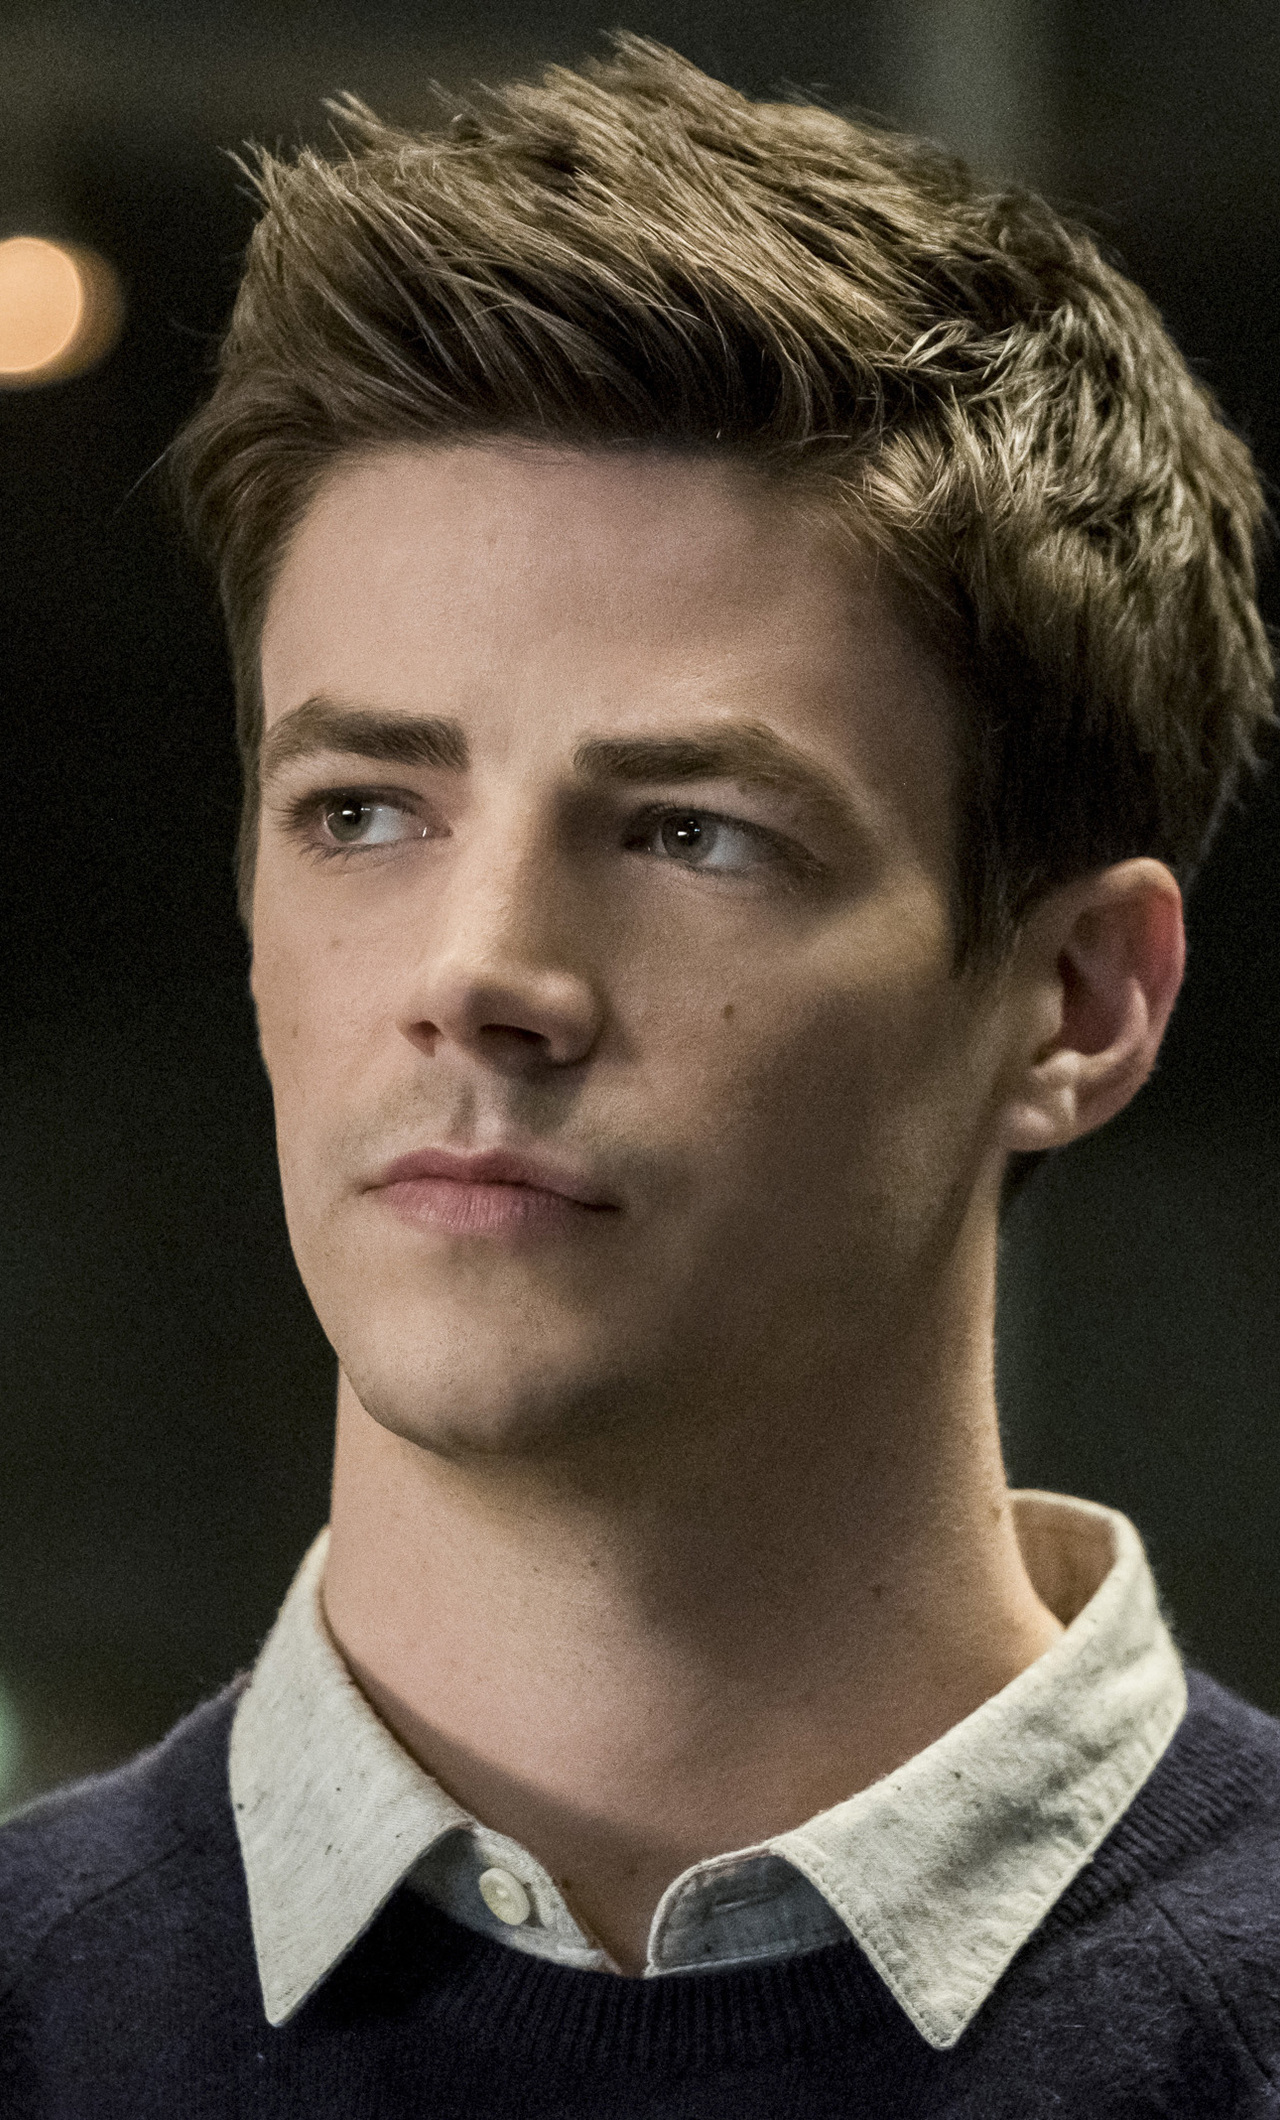 10 Ways to Make The Flash Great Again in Season 3